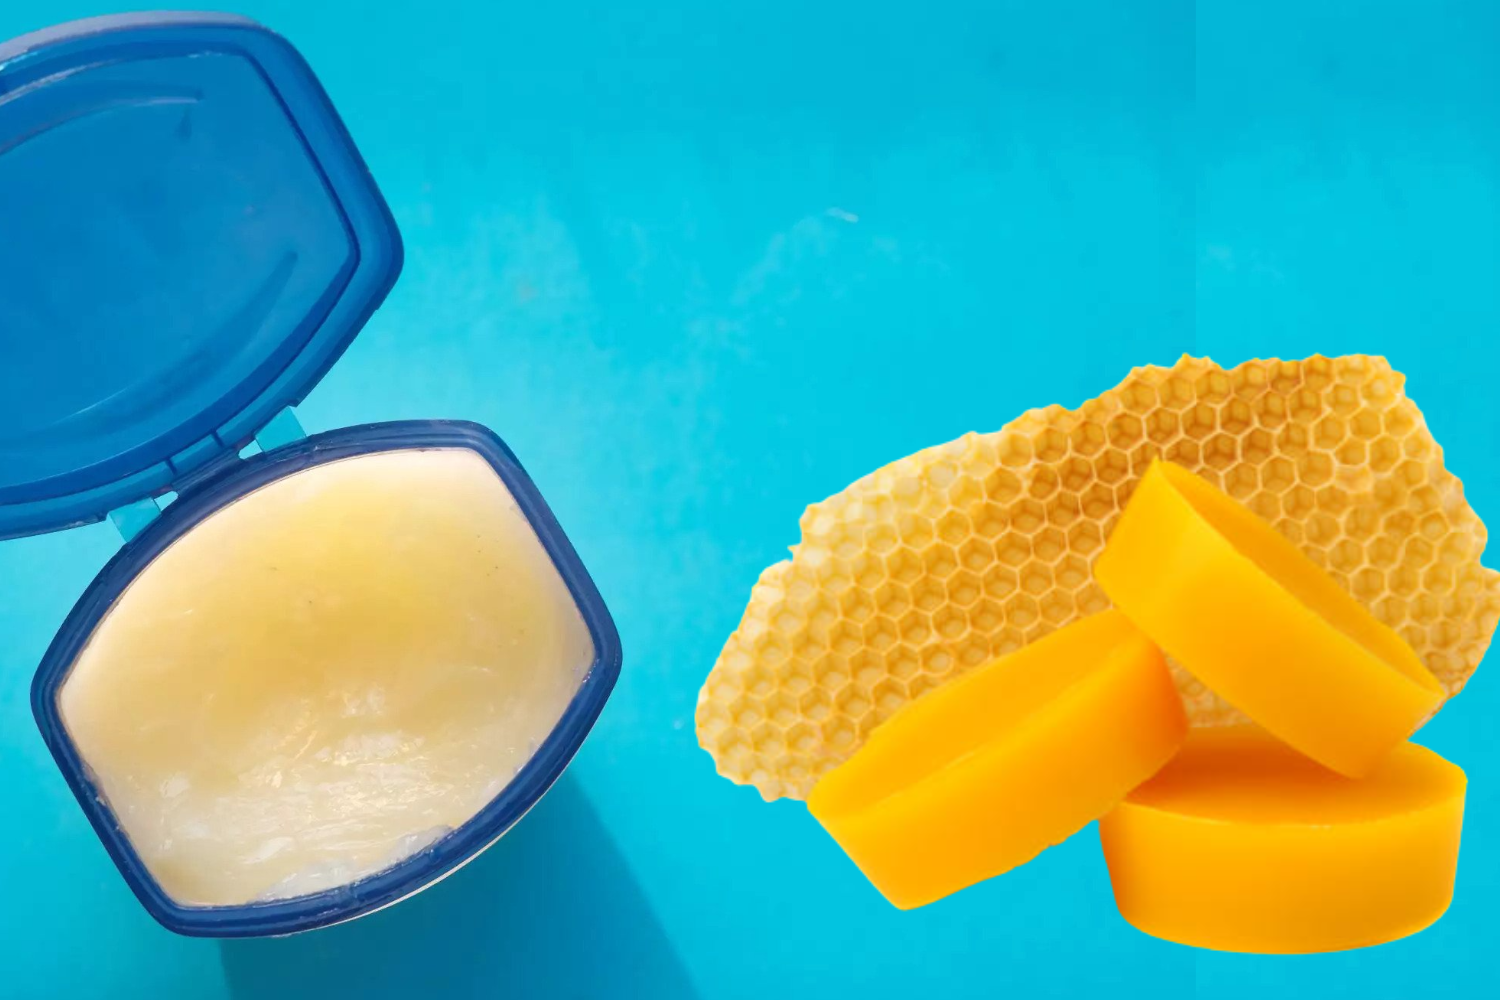 Vaseline vs Beeswax - Which One is Better?